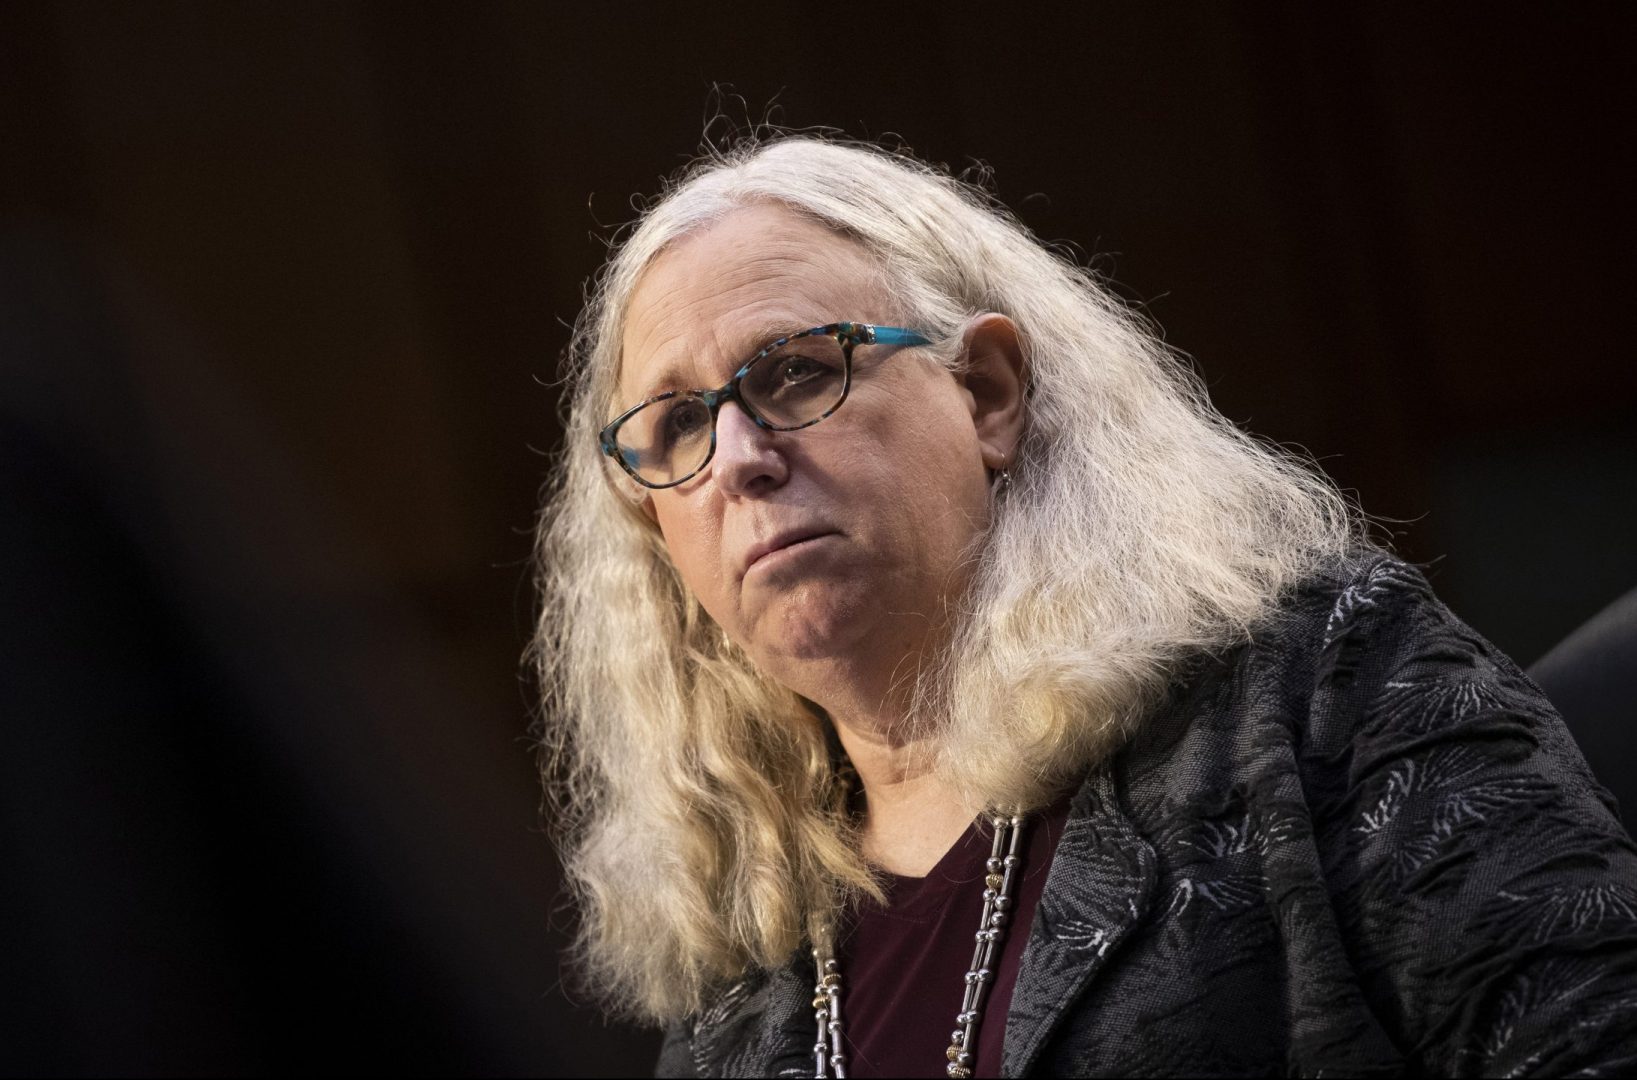 Rachel Levine, nominated to be an assistant secretary at the Department of Health and Human Services, testifies before the Senate Health, Education, Labor, and Pensions committee on Capitol Hill in Washington on Thursday, Feb. 25, 2021.